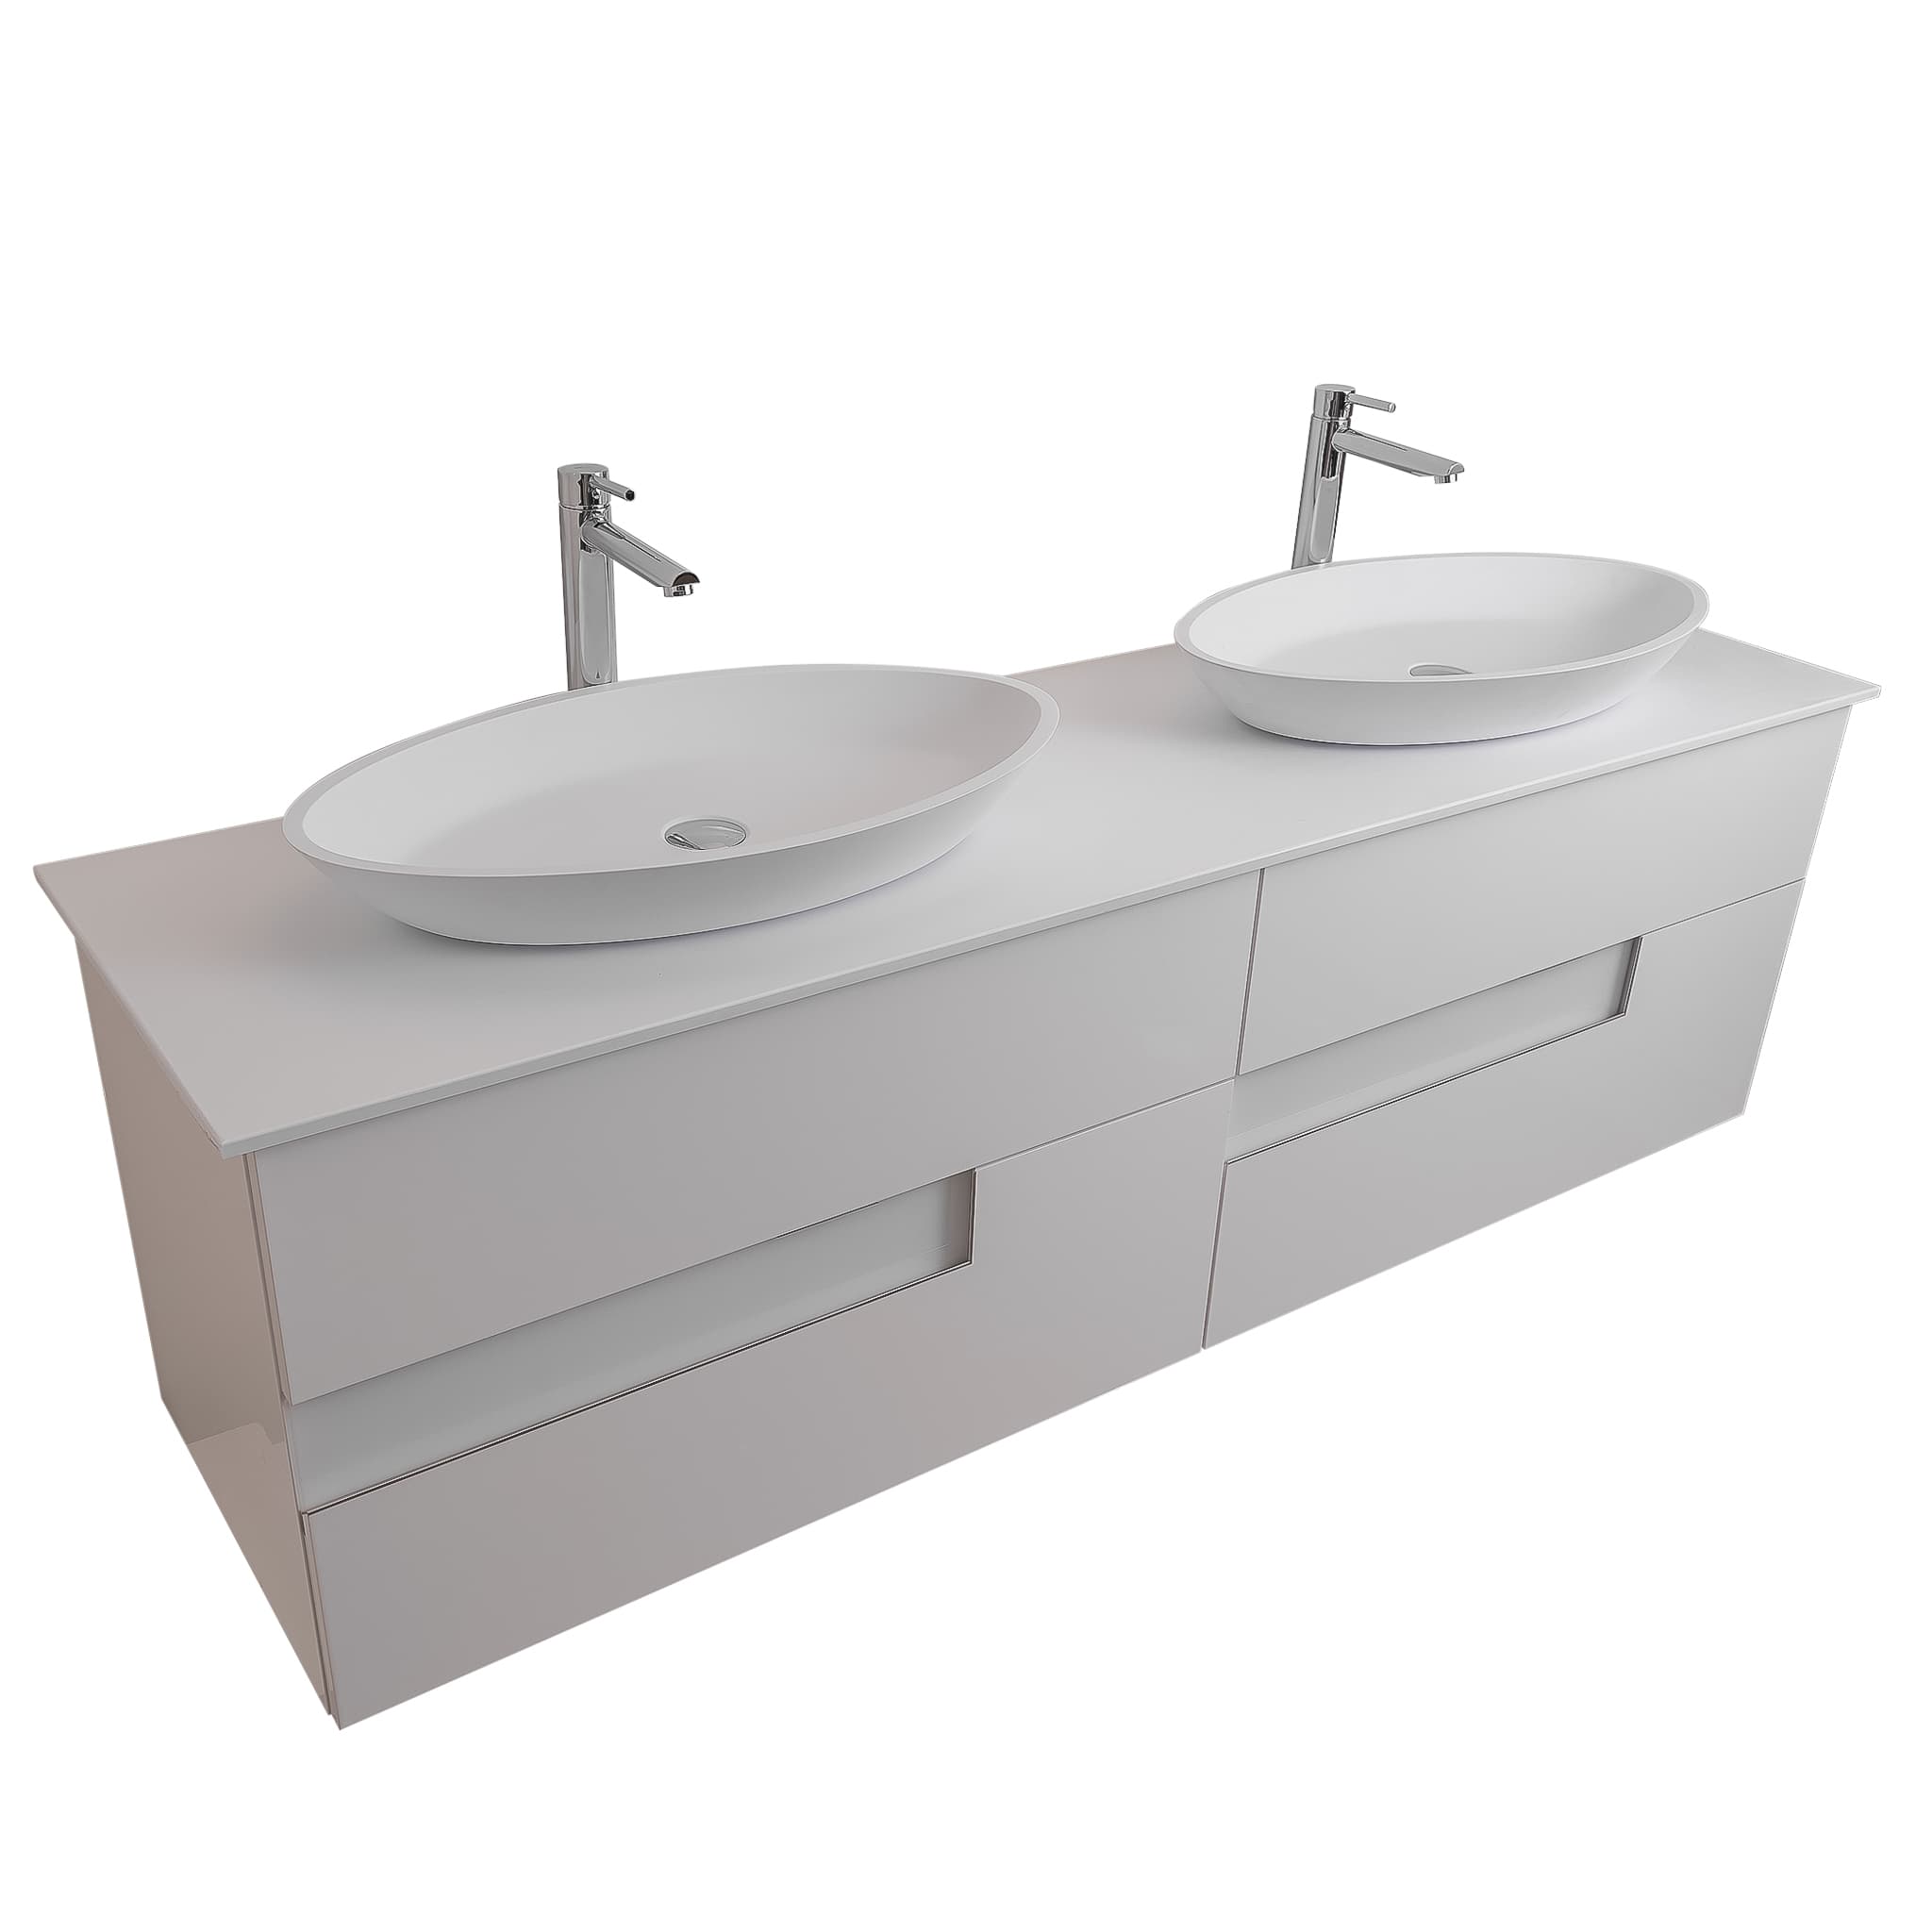 Vision 63 White High Gloss Cabinet, Solid Surface Flat White Counter And Two Oval Solid Surface White Basin 1305, Wall Mounted Modern Vanity Set